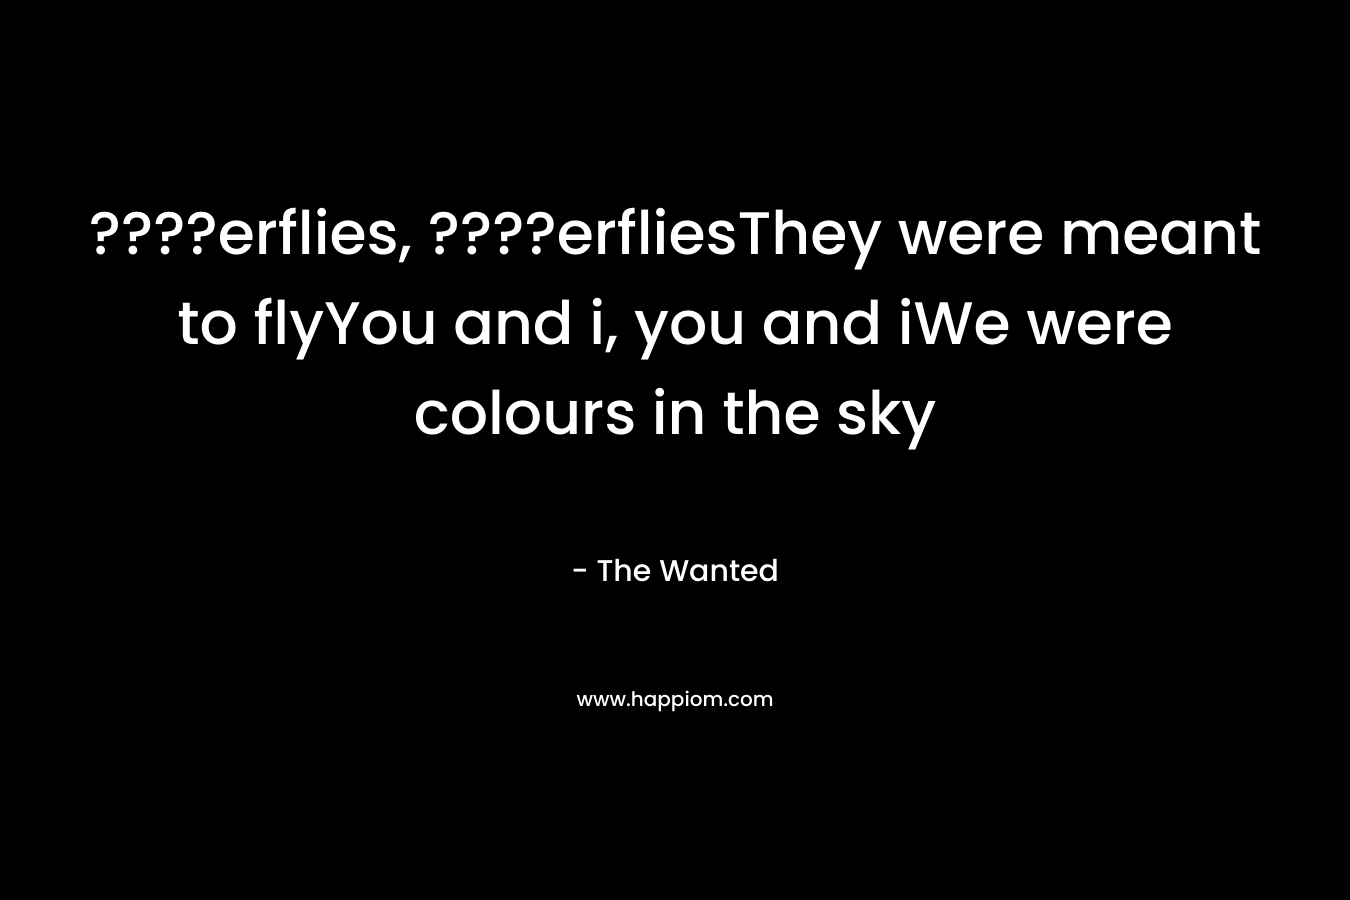 ????erflies, ????erfliesThey were meant to flyYou and i, you and iWe were colours in the sky